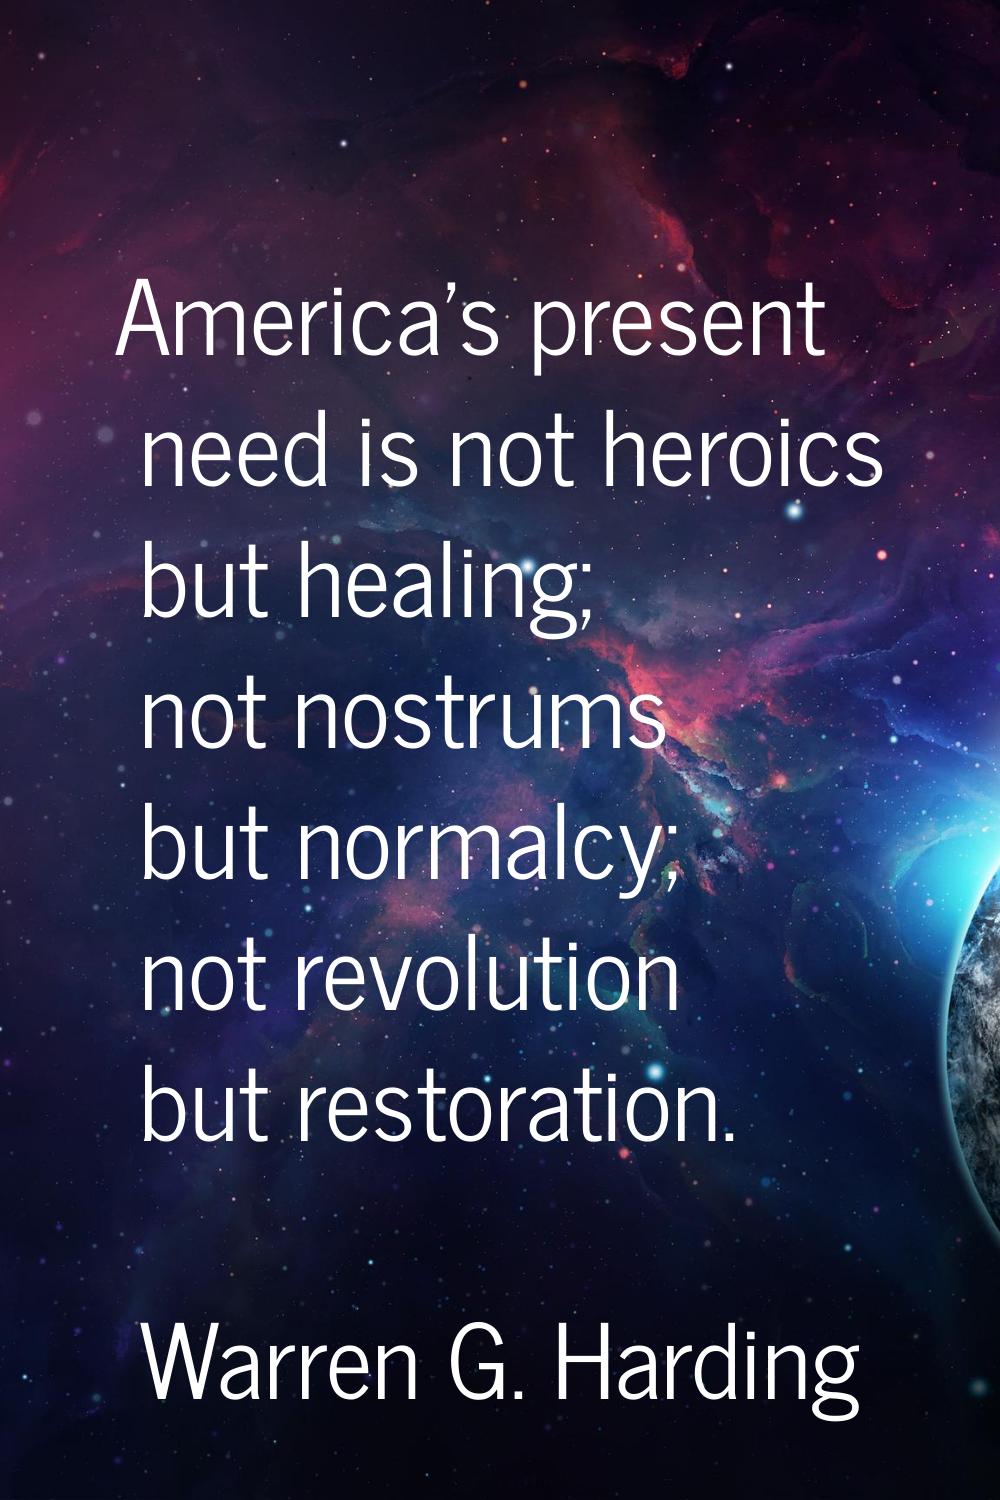 America's present need is not heroics but healing; not nostrums but normalcy; not revolution but re